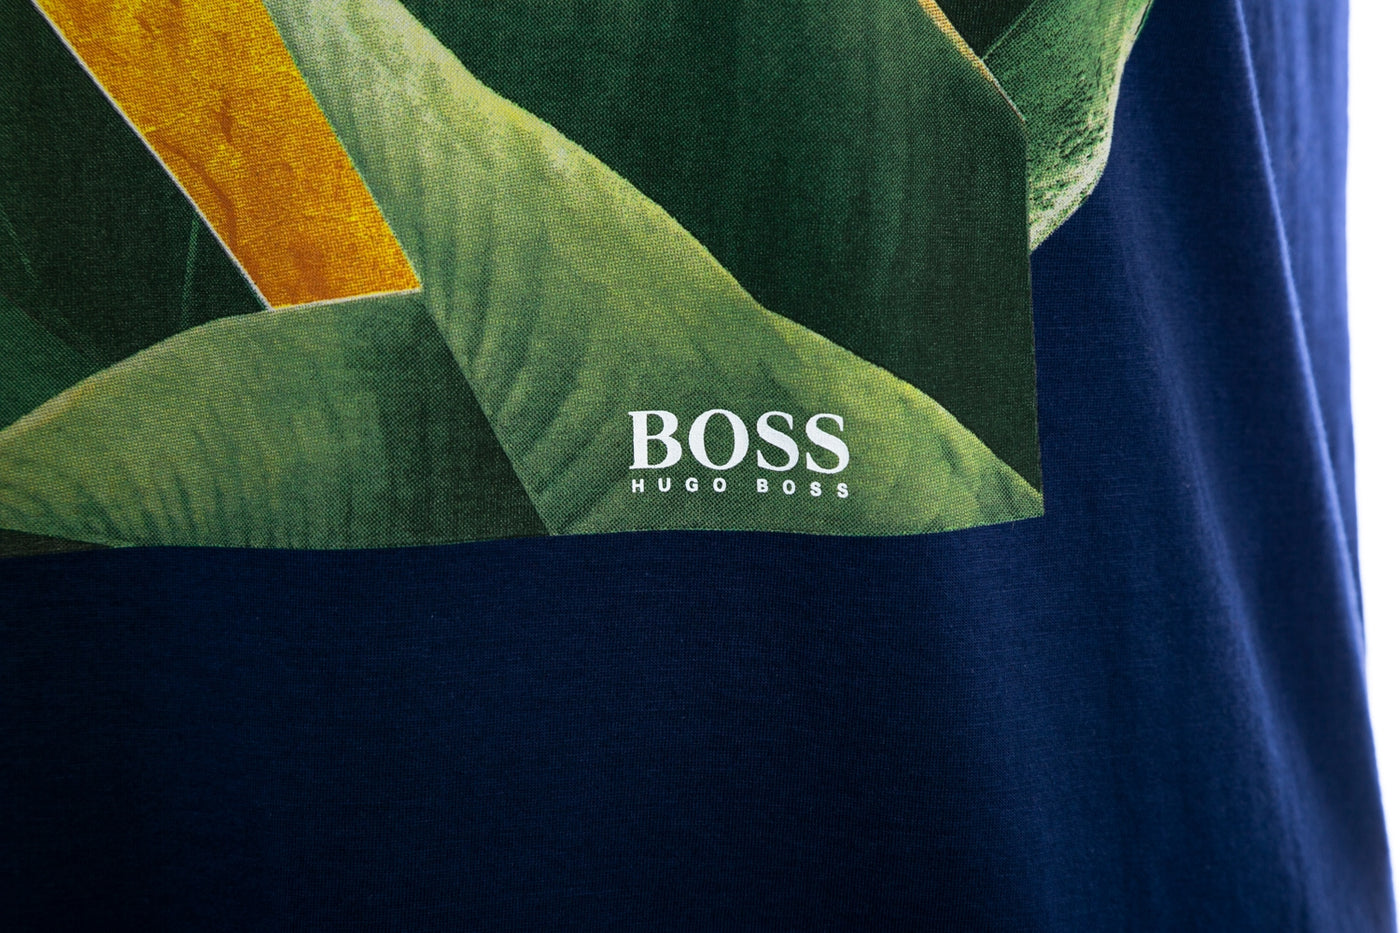 BOSS Tejungle 1 T Shirt in Navy